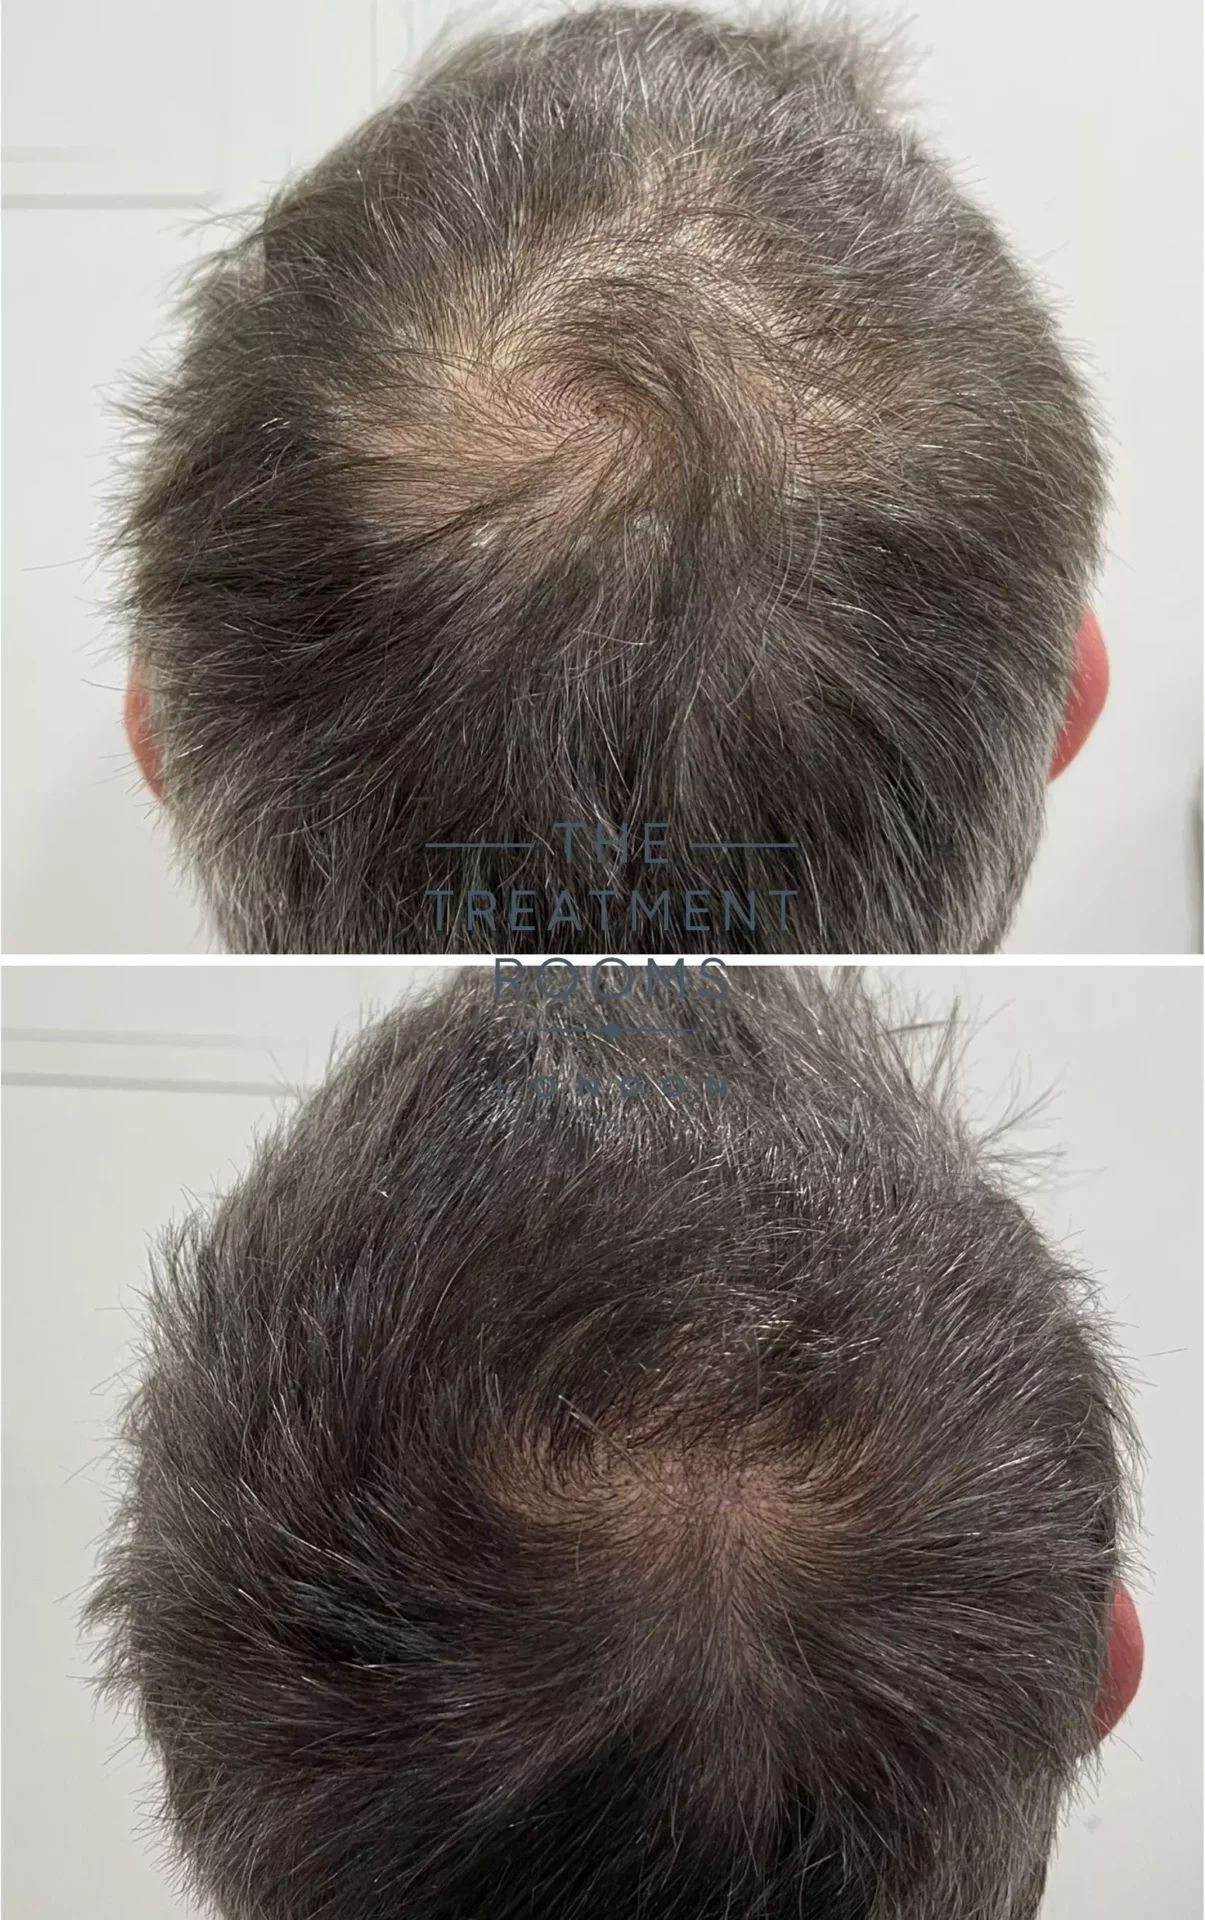 crown hair transplant clinic before and after 597 grafts